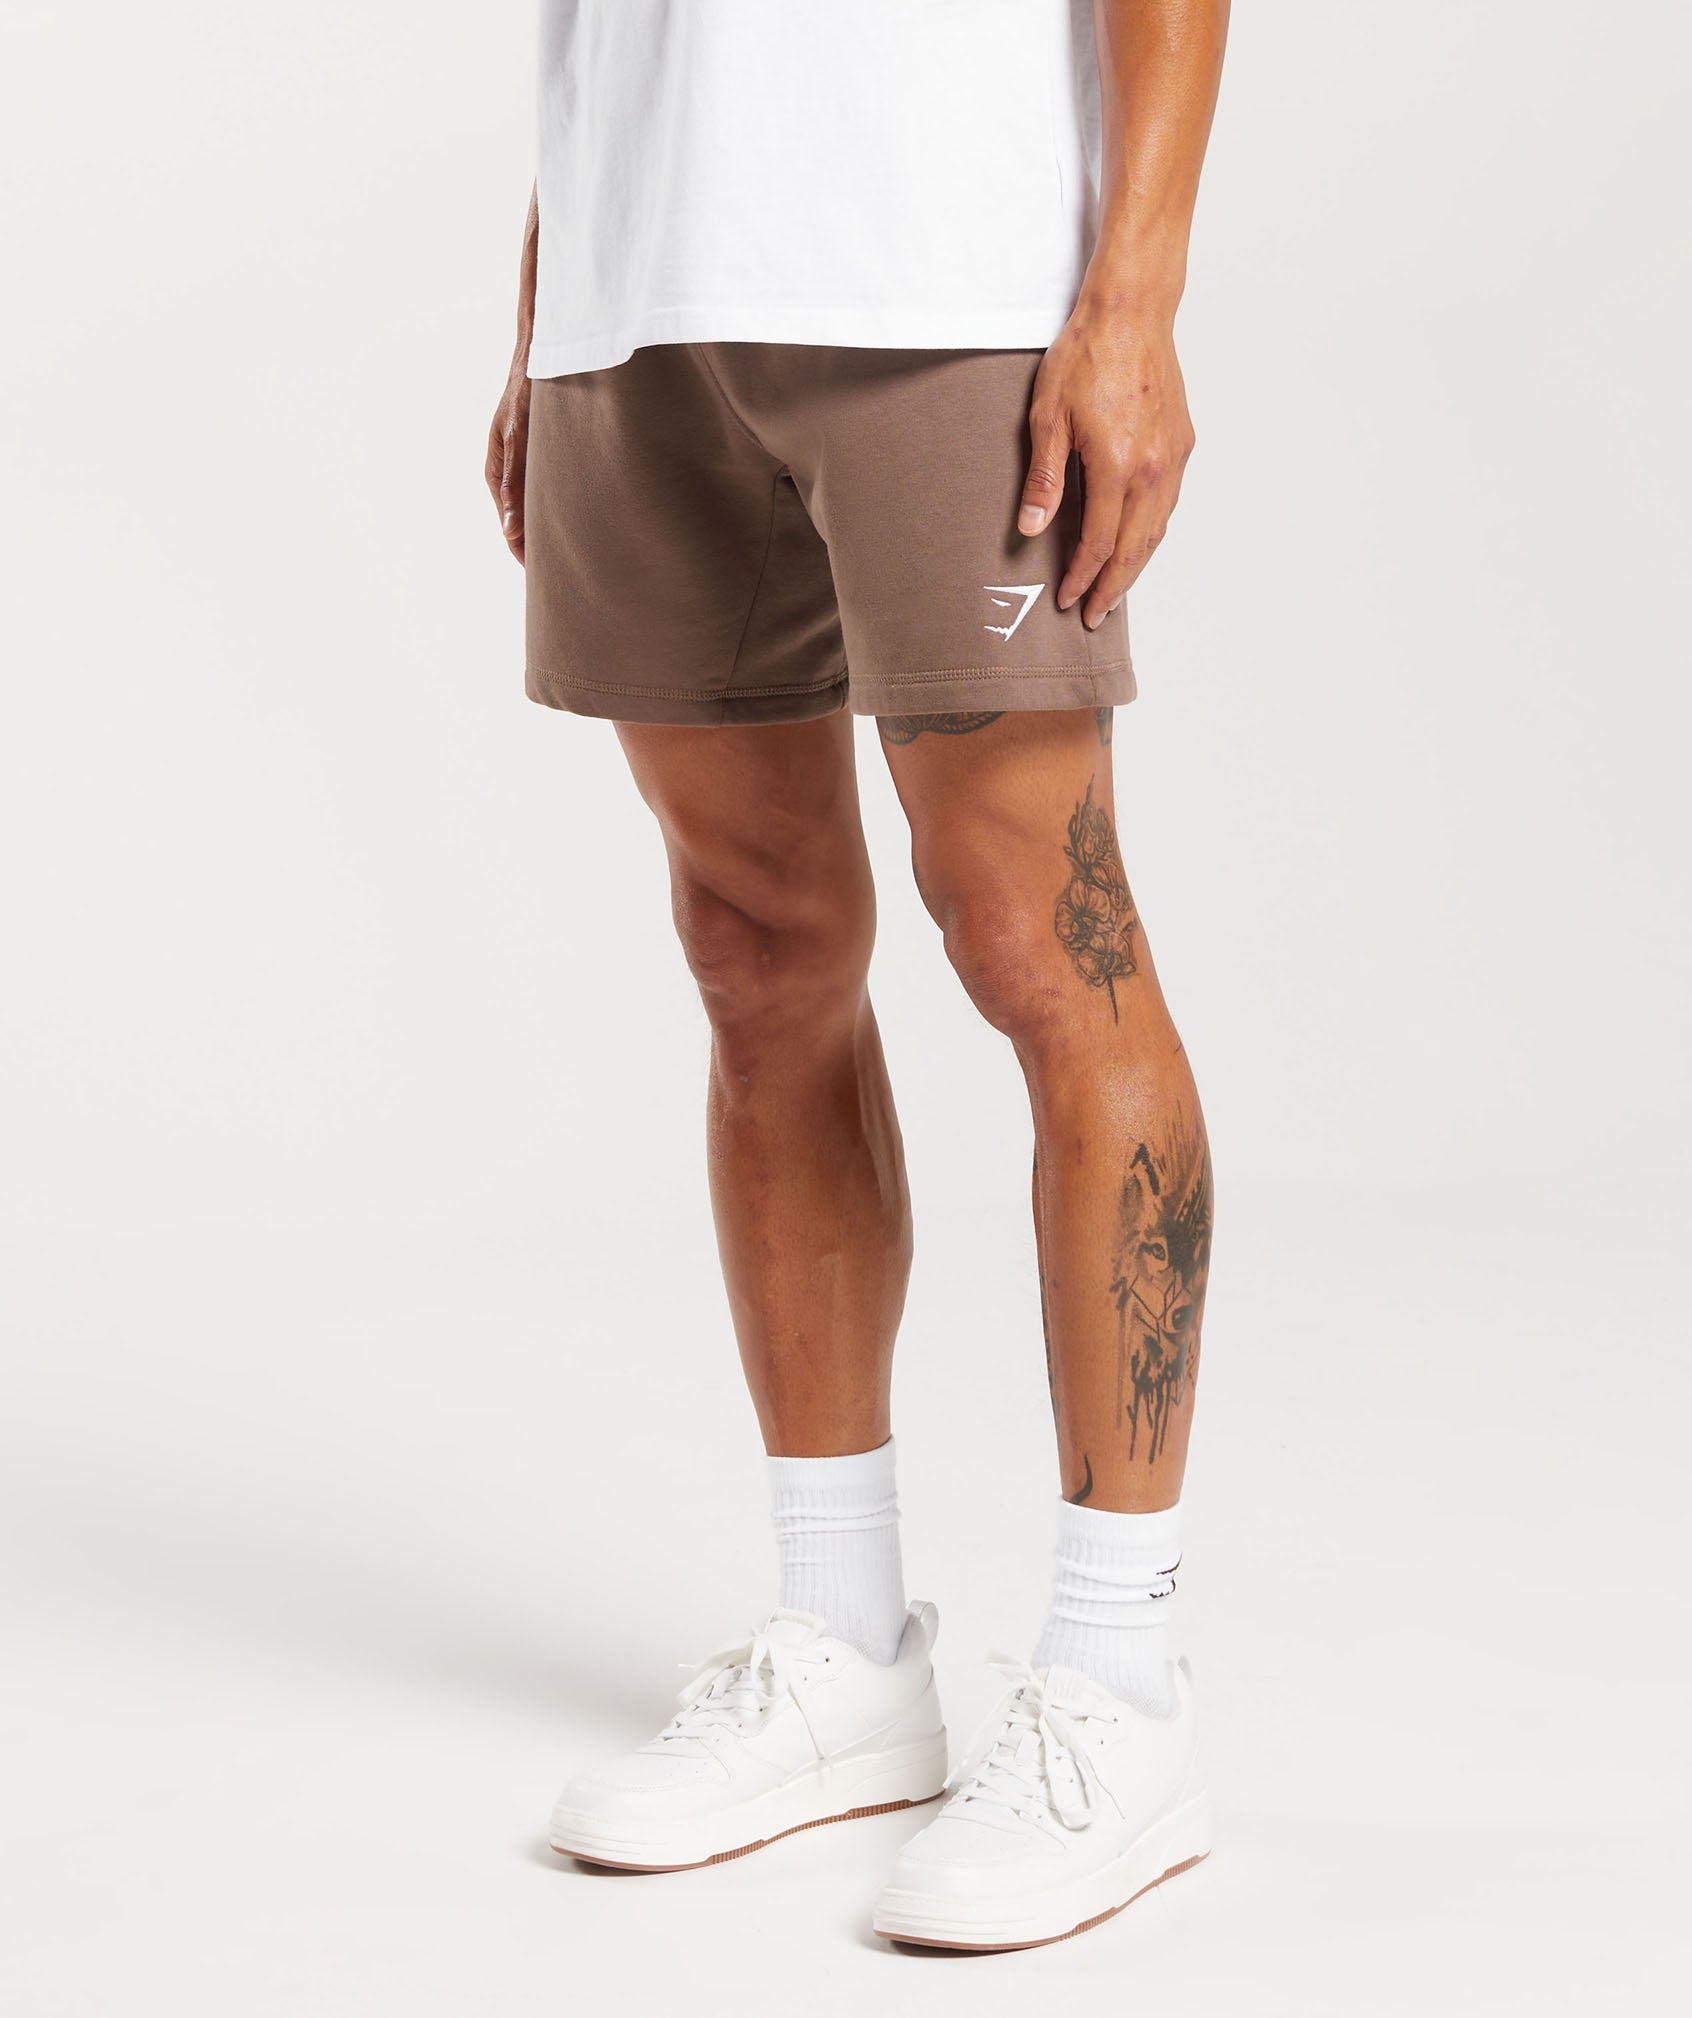 Crest Shorts in Truffle Brown - view 3